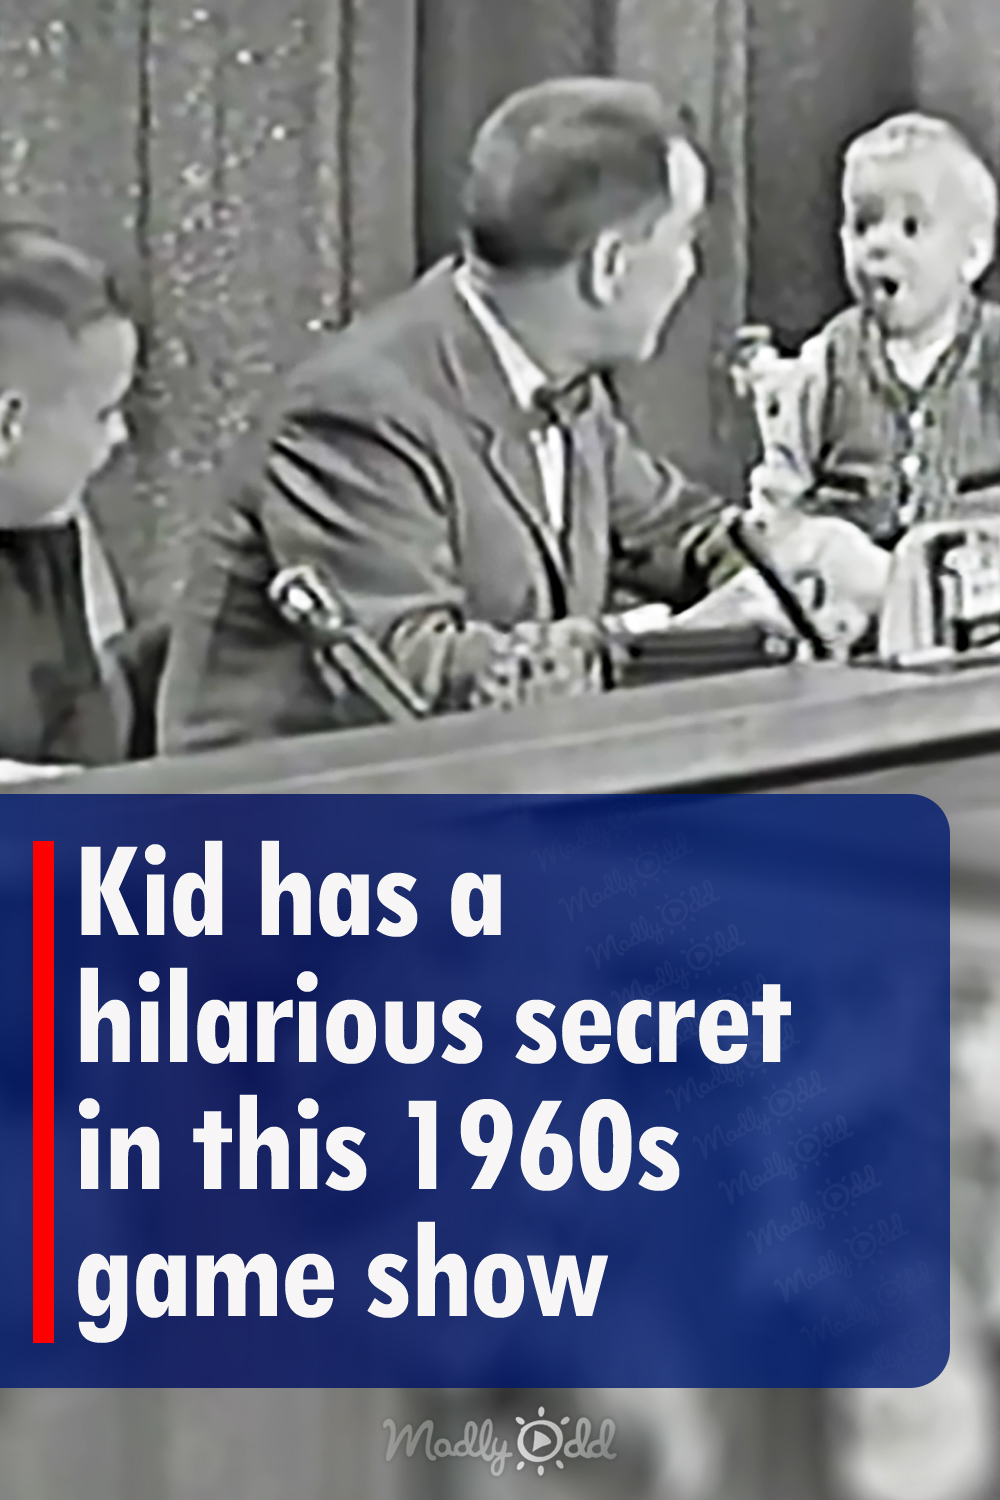 Kid has a hilarious secret in this 1960s game show